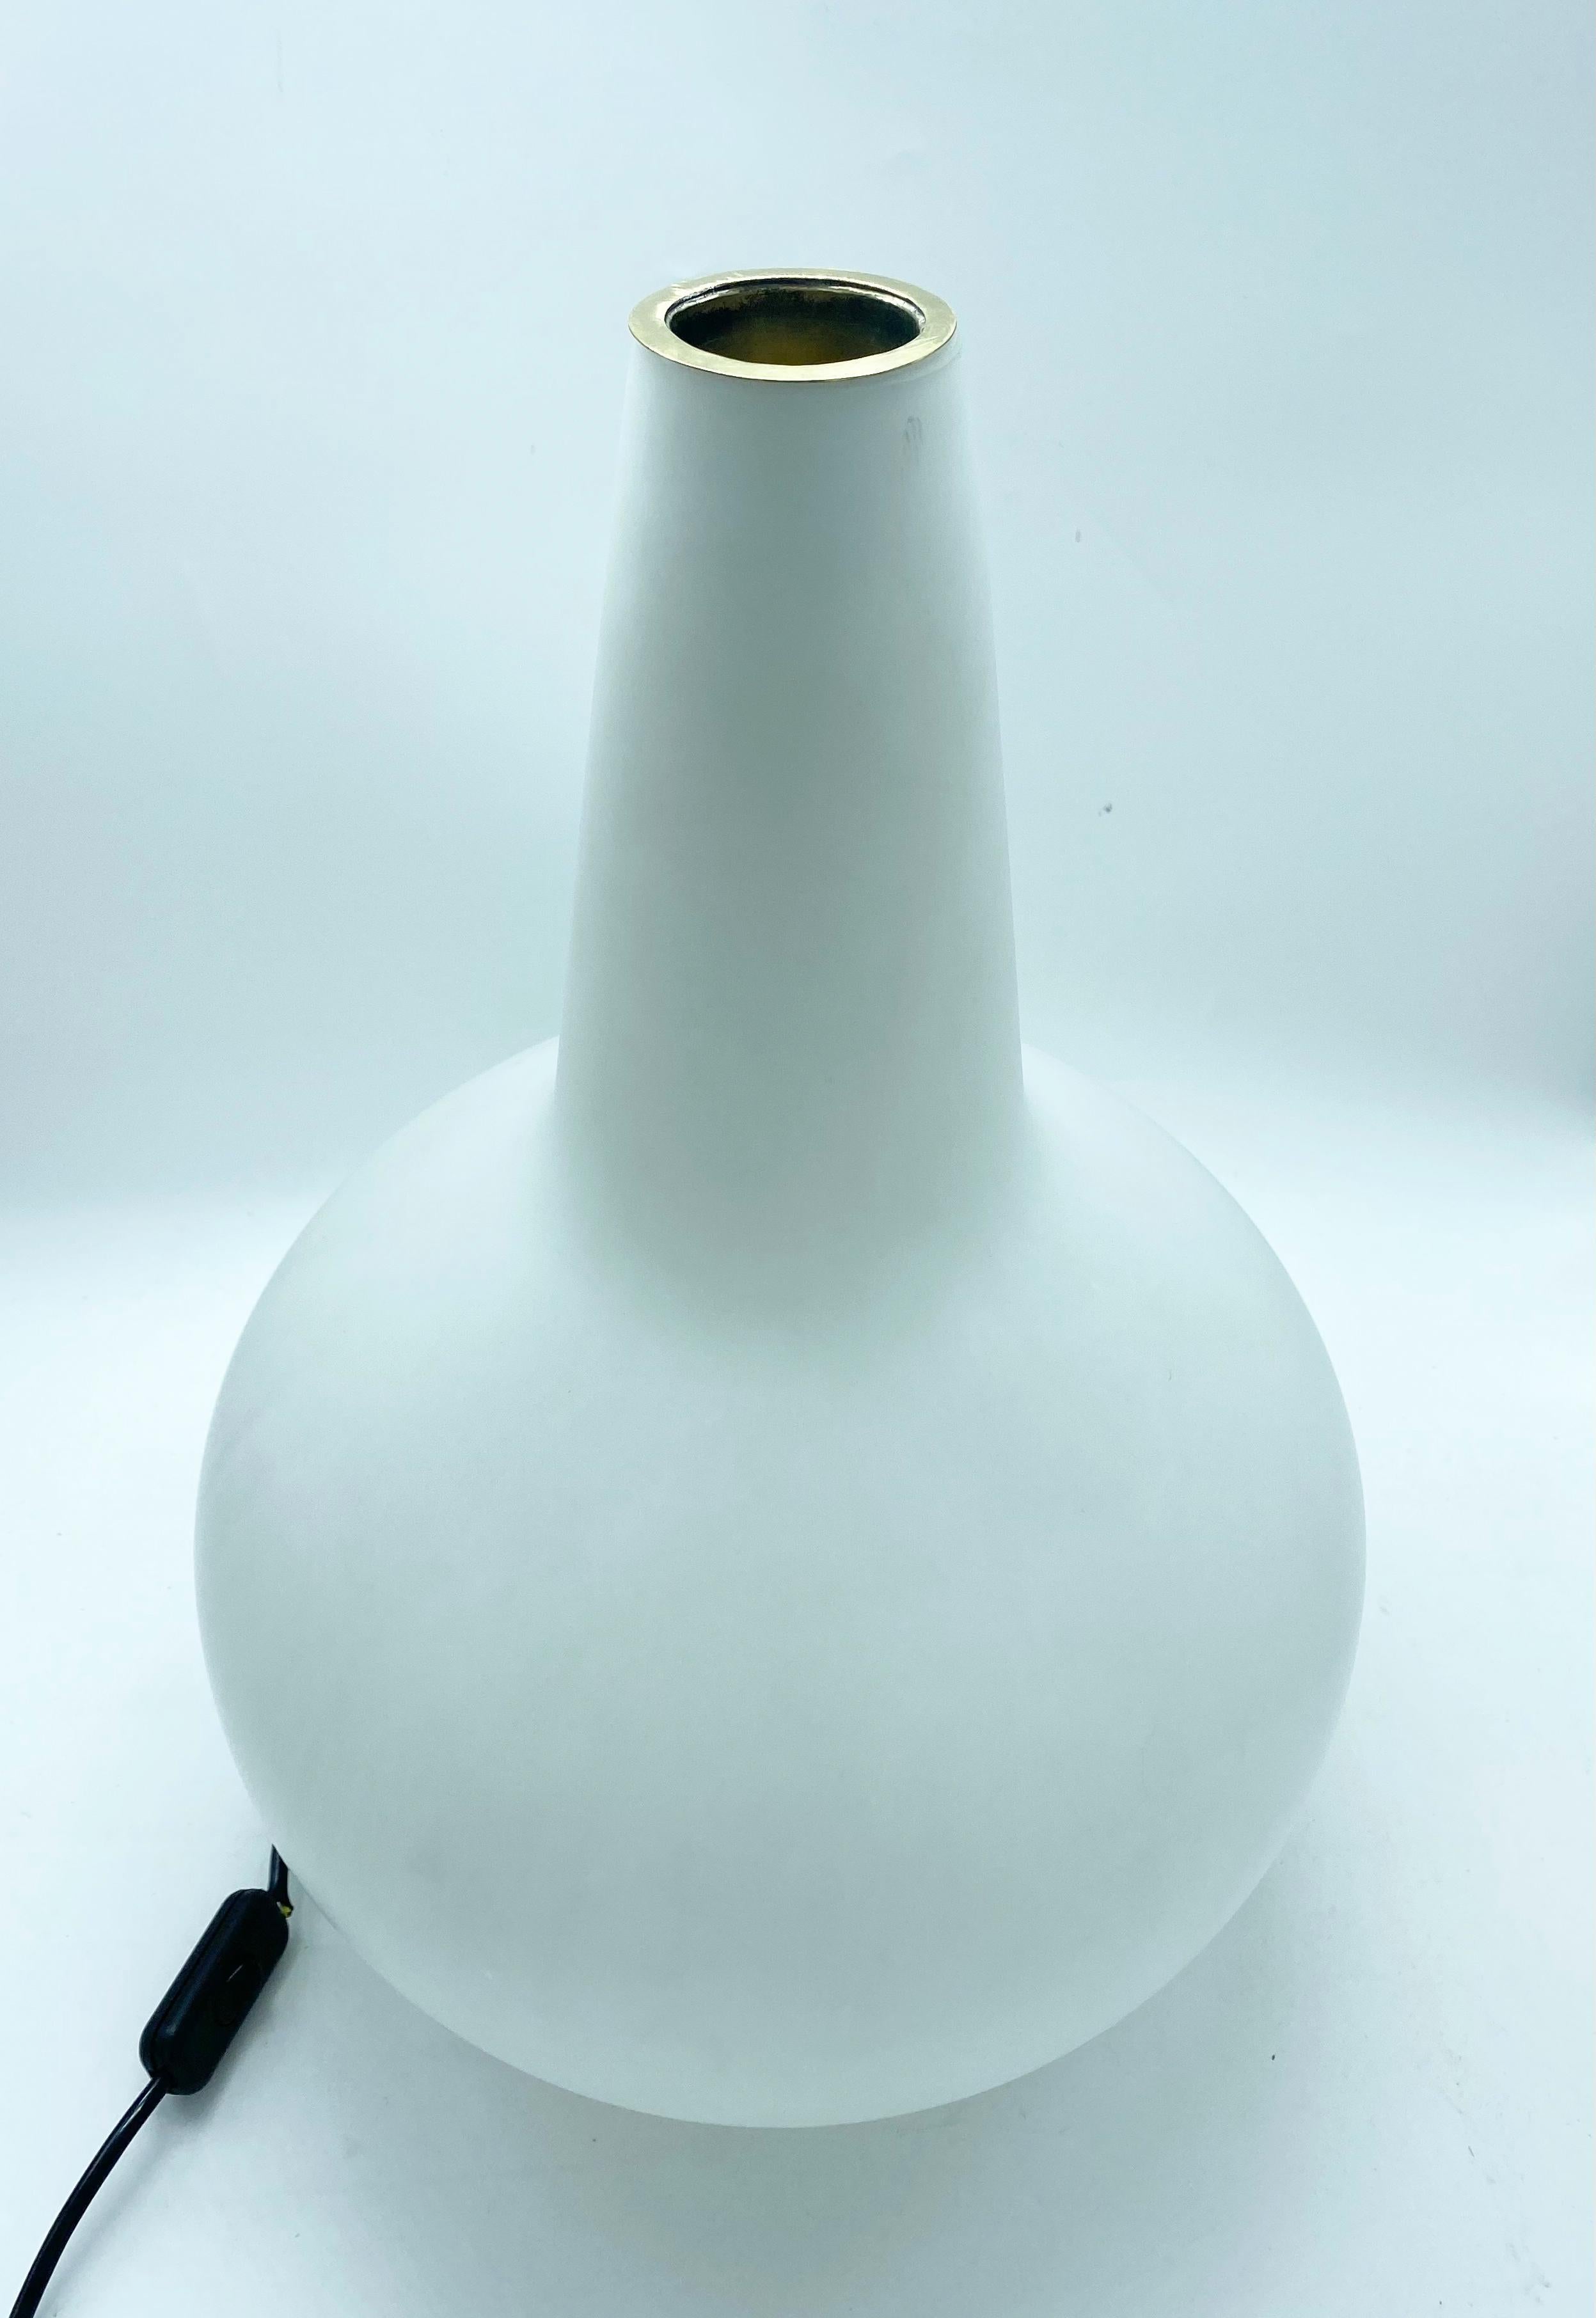 Max Ingrand project, 1954, for Fontana Arte, Italy, white satin glass, small brass seal in the vase, metal base, white lacquered, measures: height 33 cm, diameter 24 cm.